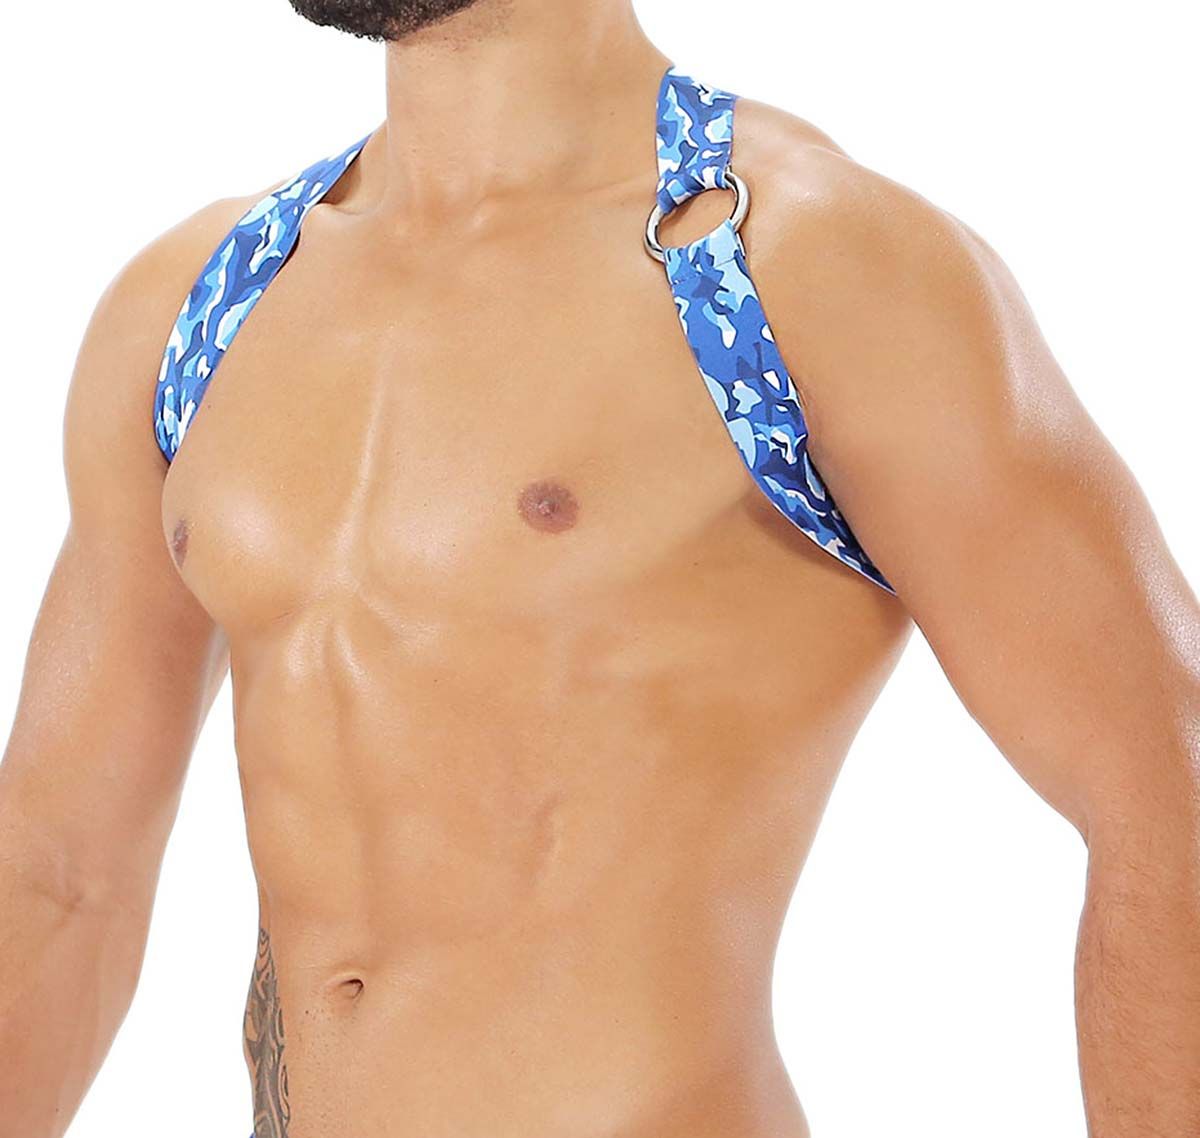 TOF Harness PARTY BOY ELASTIC HARNESS CAMO/BLUE H0018CBU, camouflage/blue